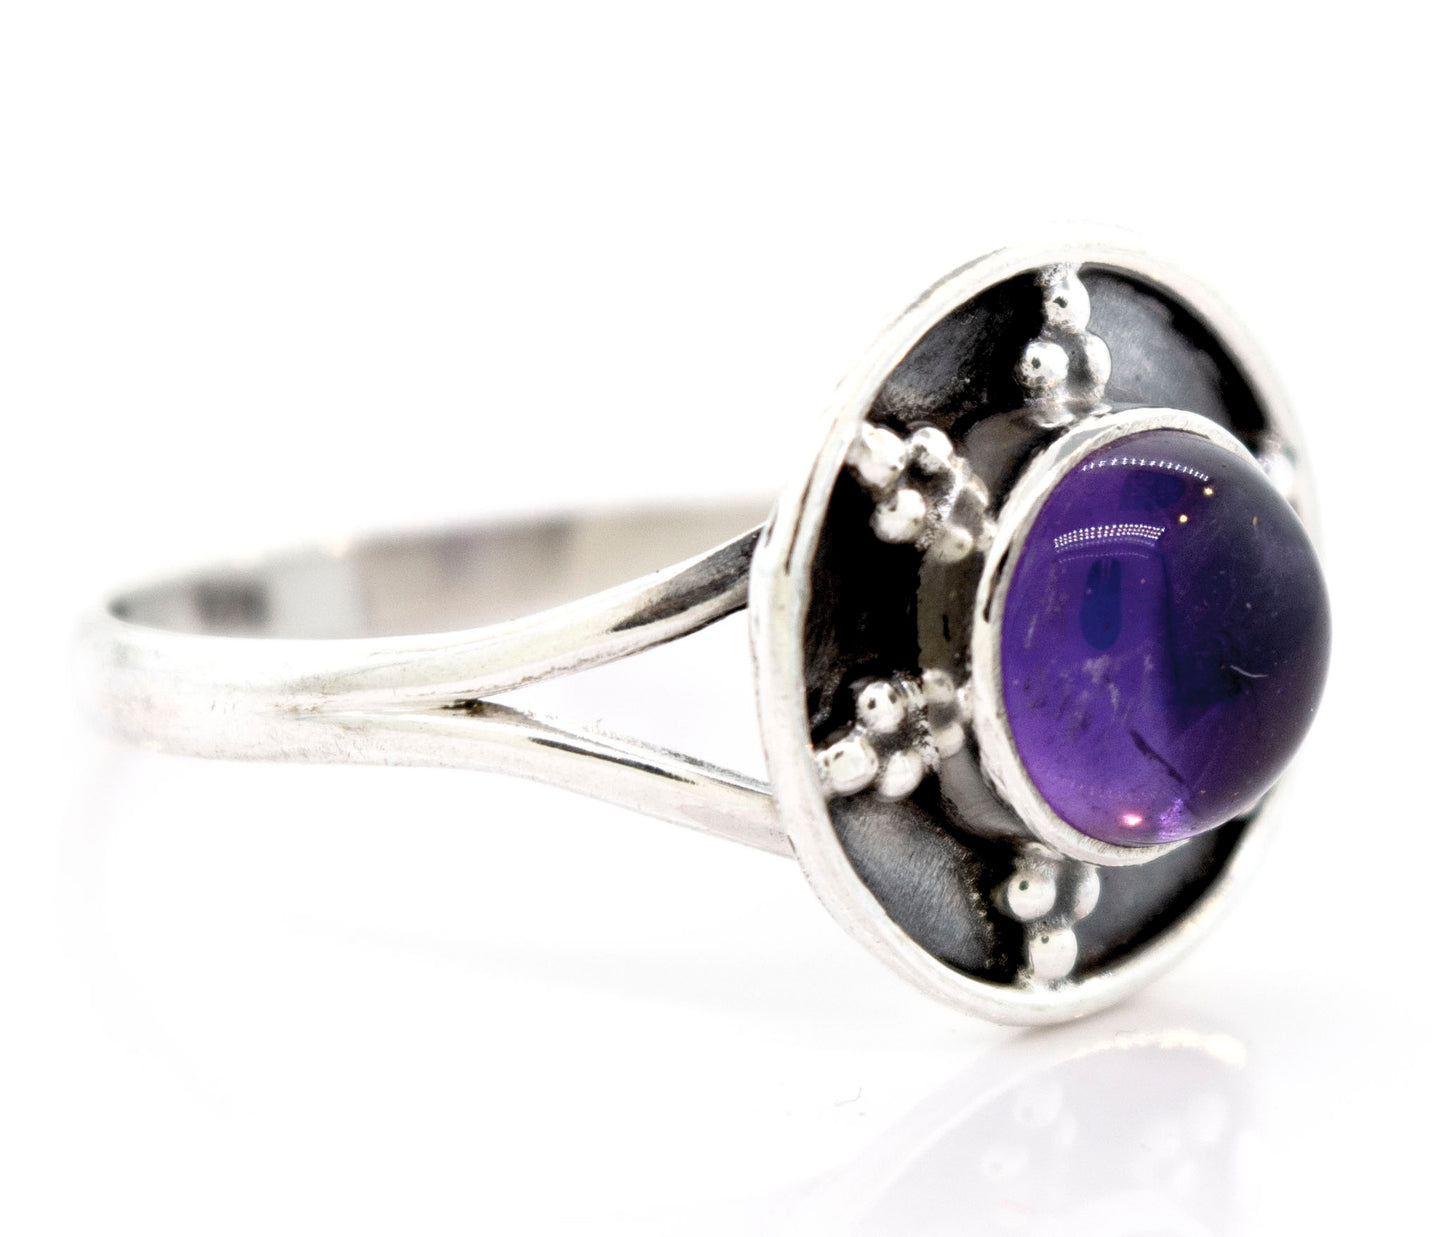 Super Silver presents the Amethyst Ring With Unique Oxidized Silver Design.